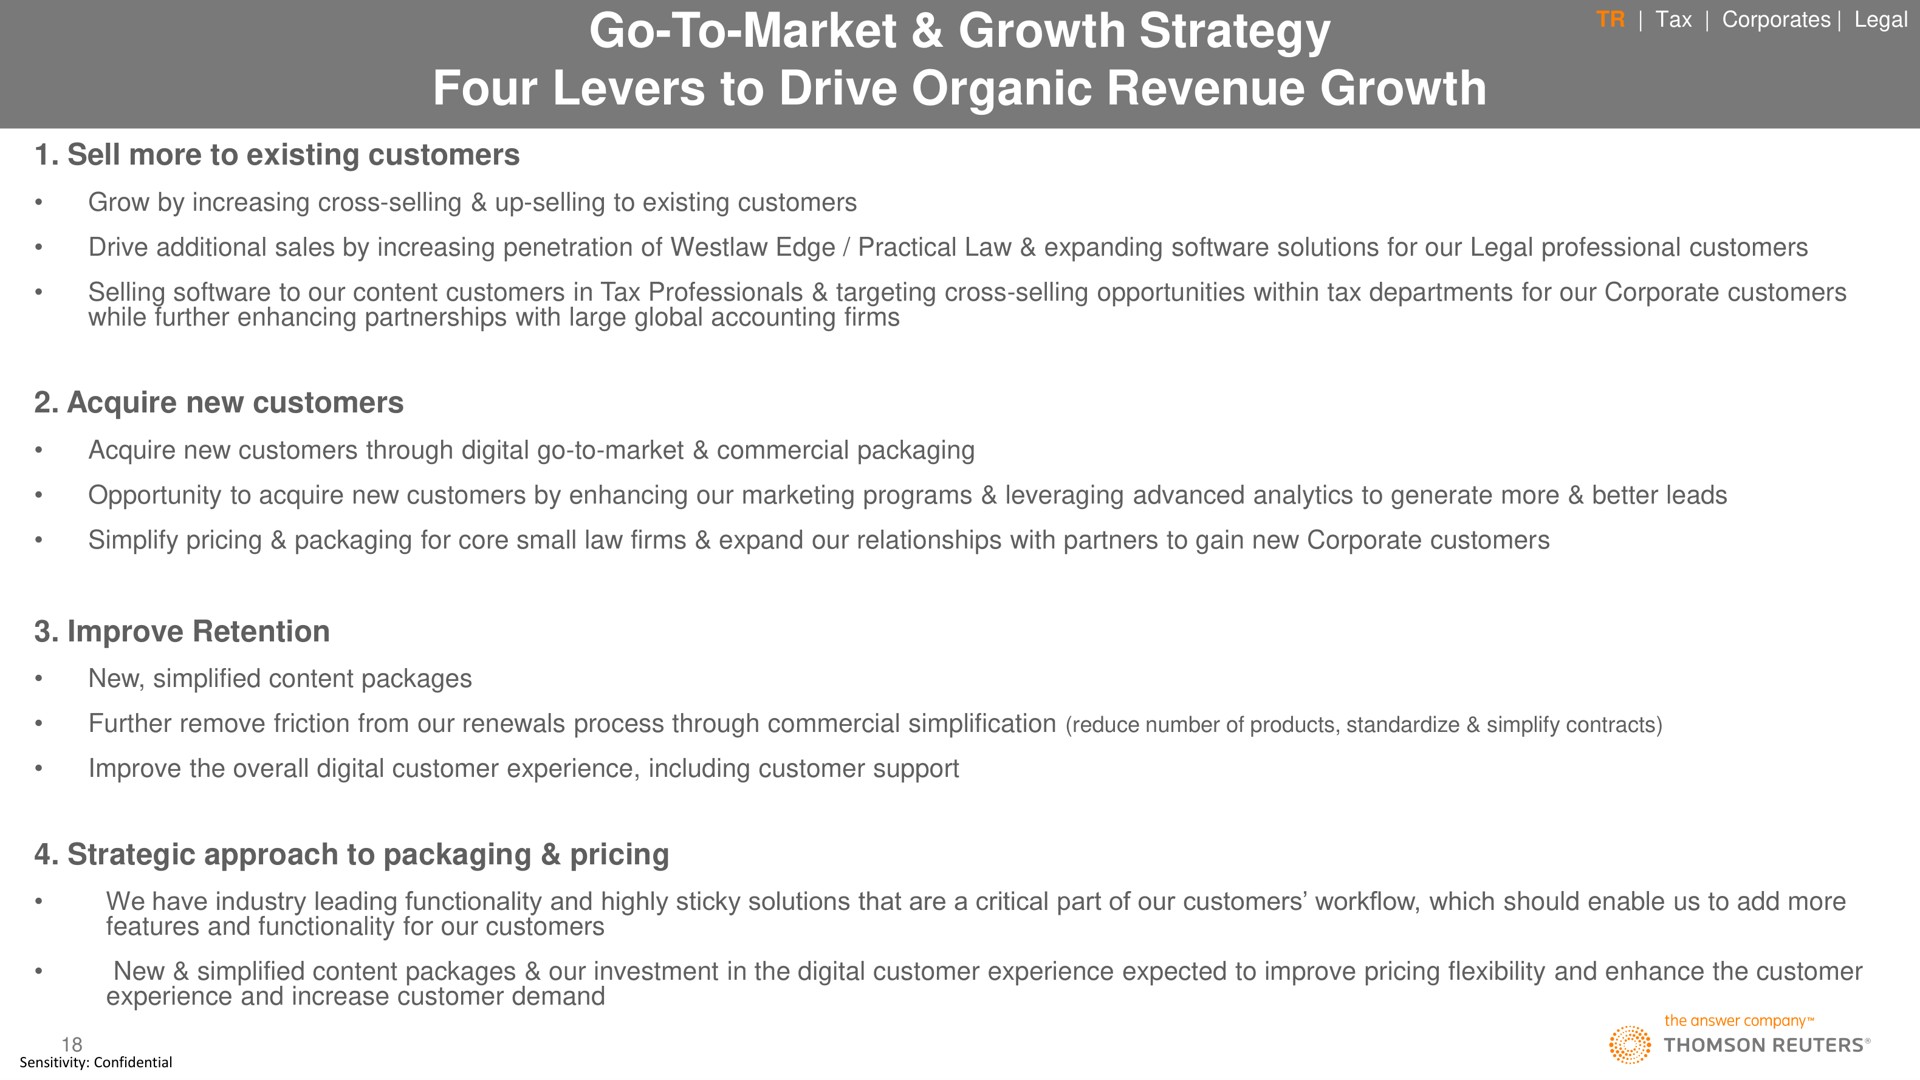 go to market growth strategy four levers to drive organic revenue growth mes nese | Thomson Reuters